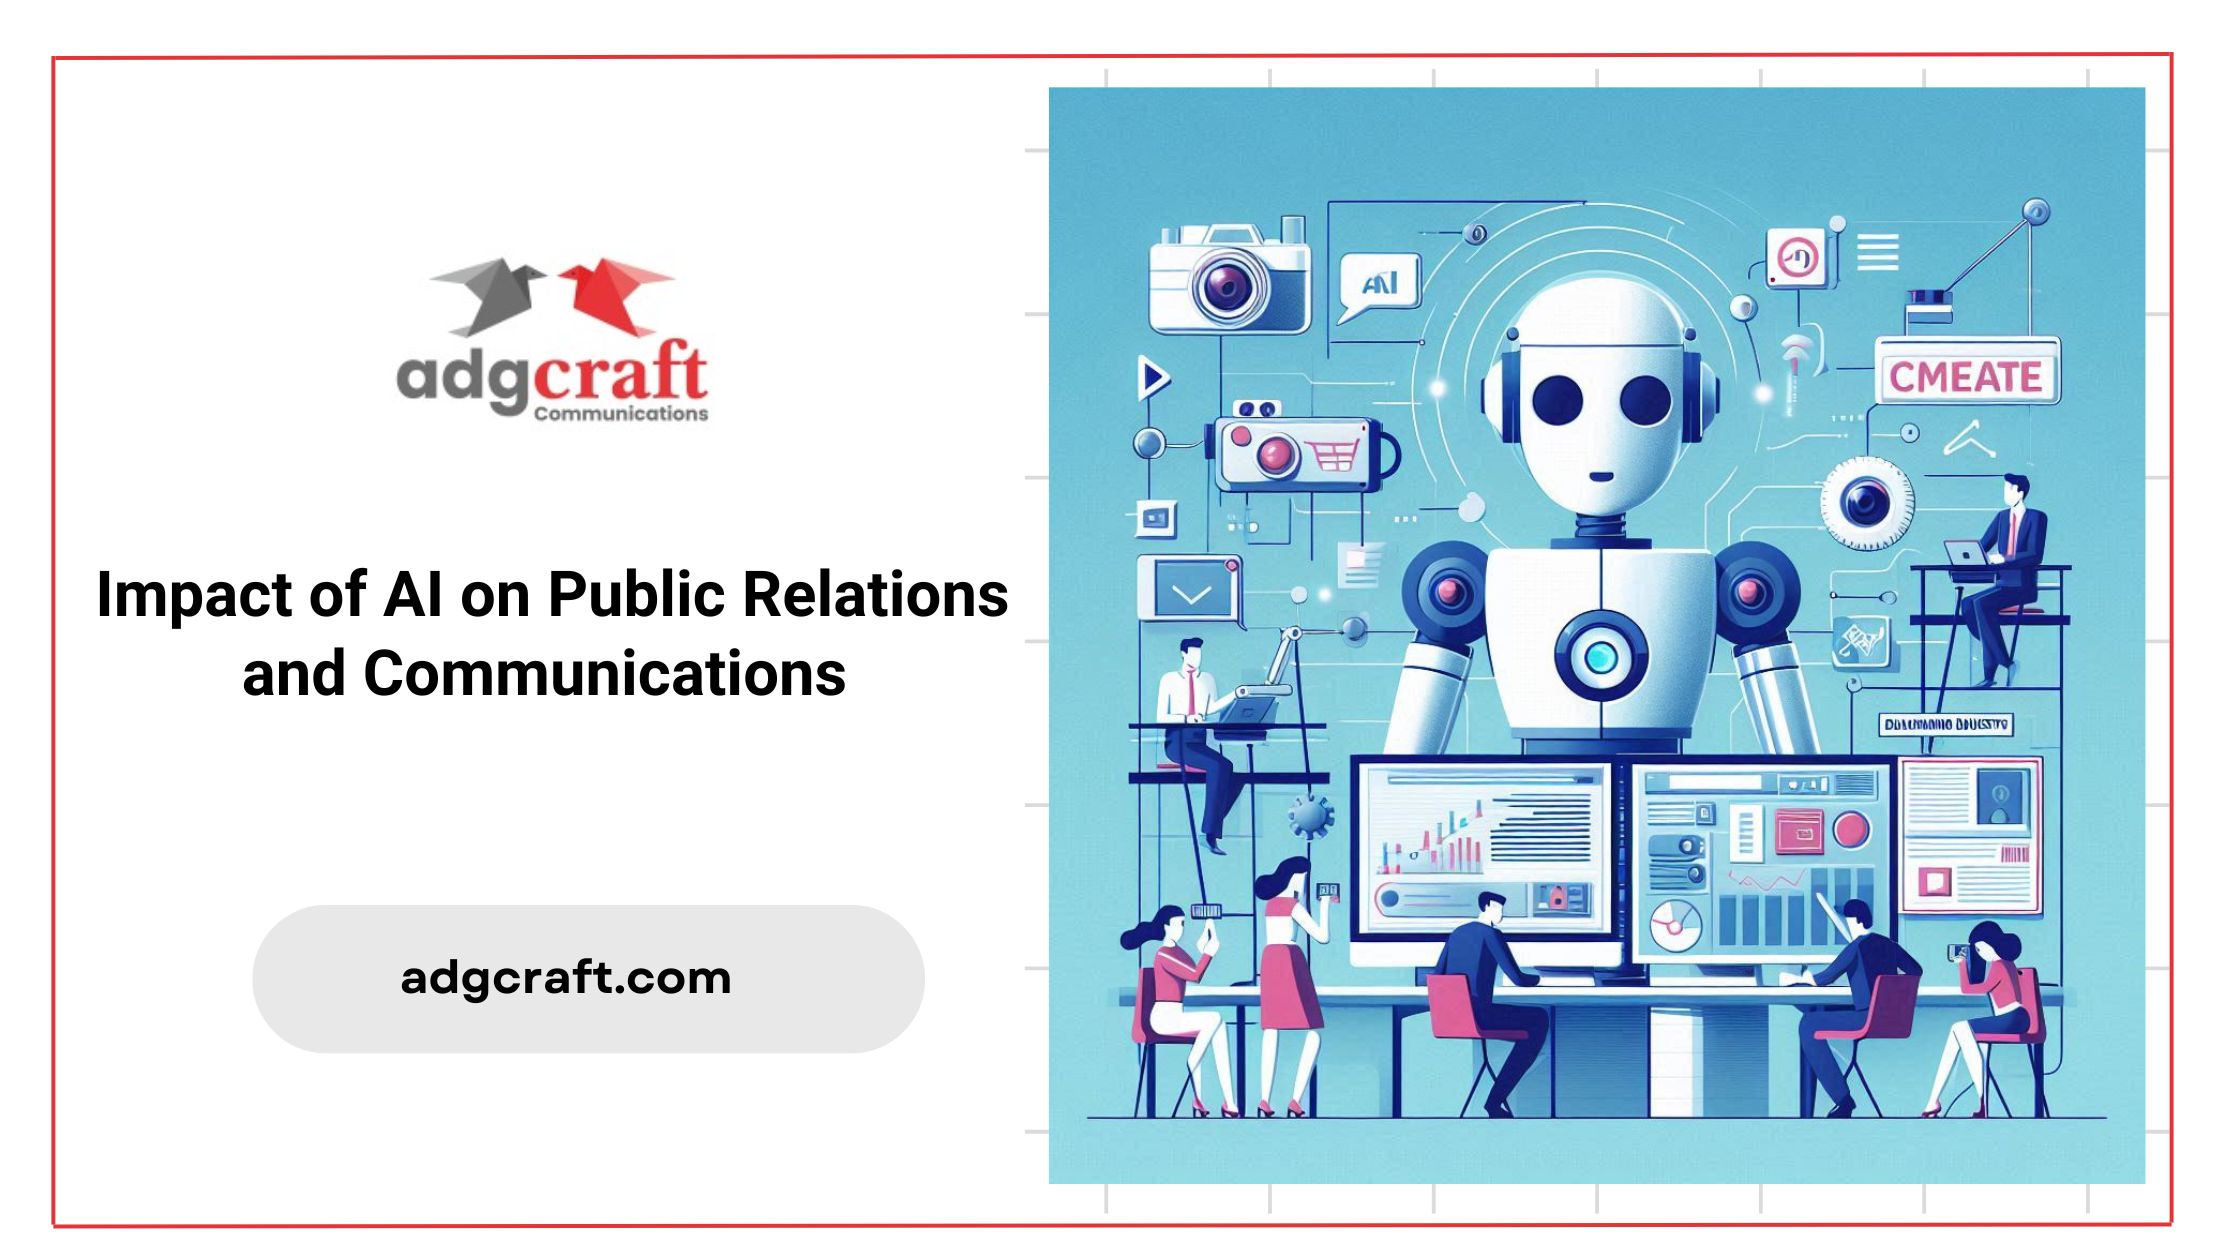 Impact of Ai on PR and Communications